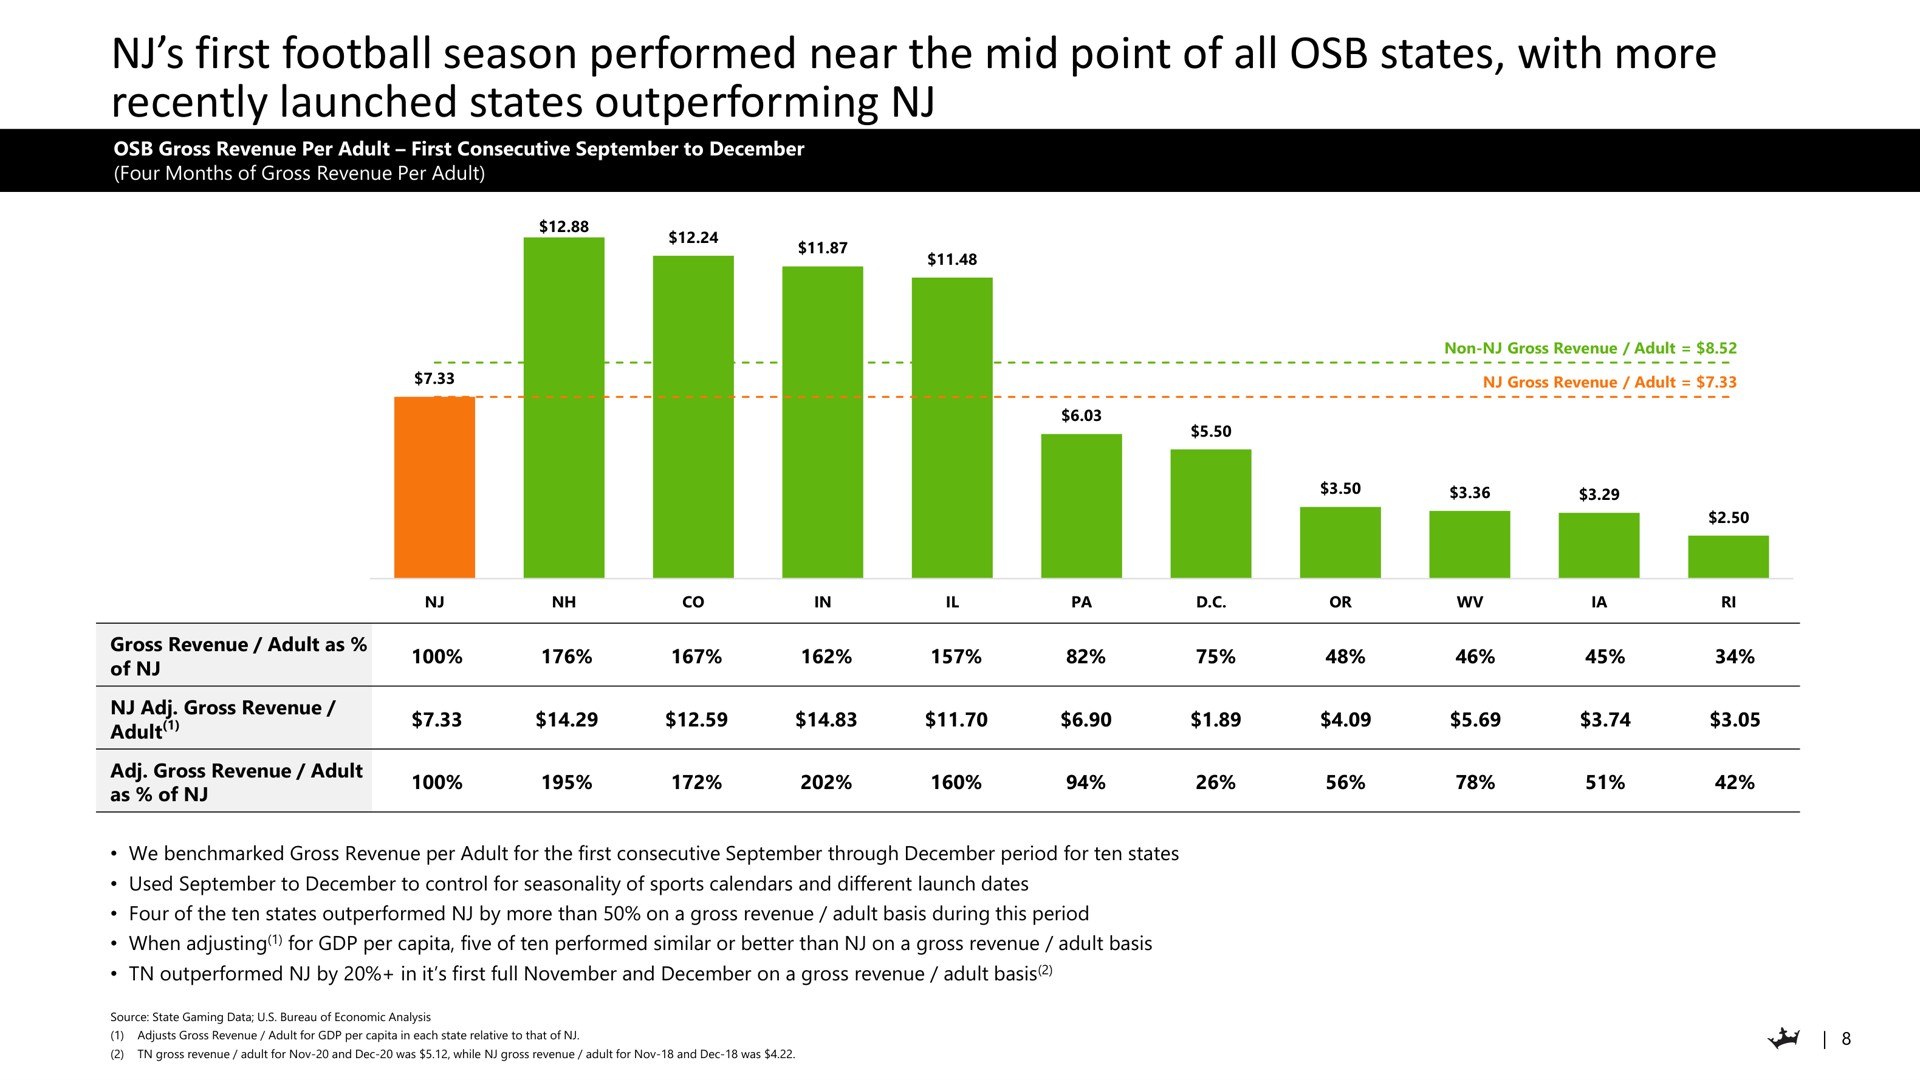 first football season performed near the mid point of all states with more recently launched states outperforming | DraftKings